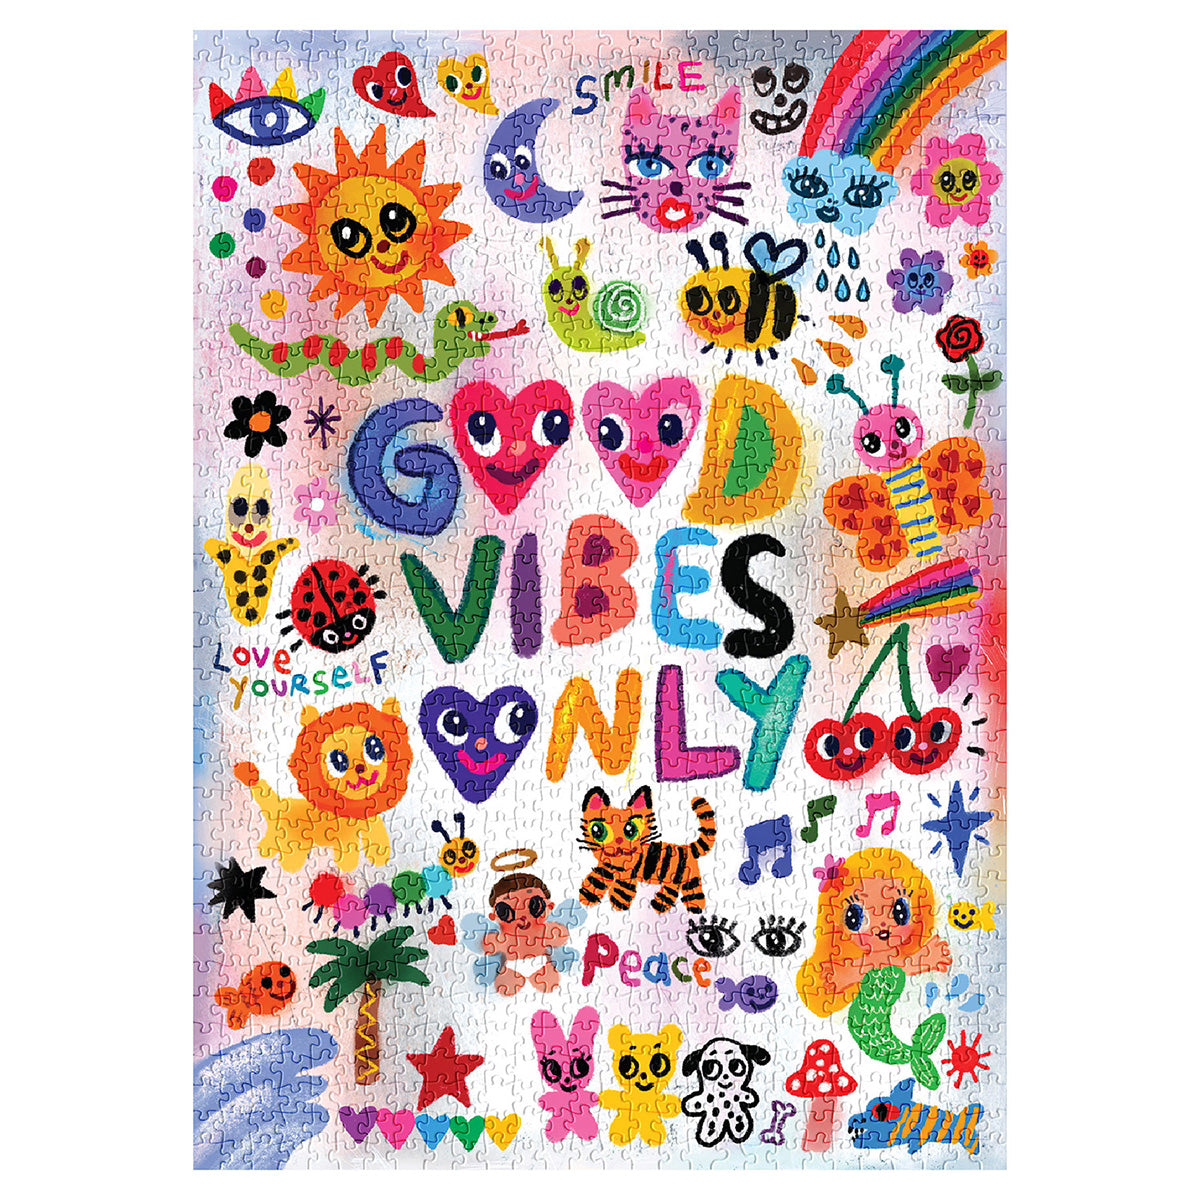 SOONNESS critter bundle cartoon illustration 1000 piece puzzle good vibes only iscreamcolour humberto cruz